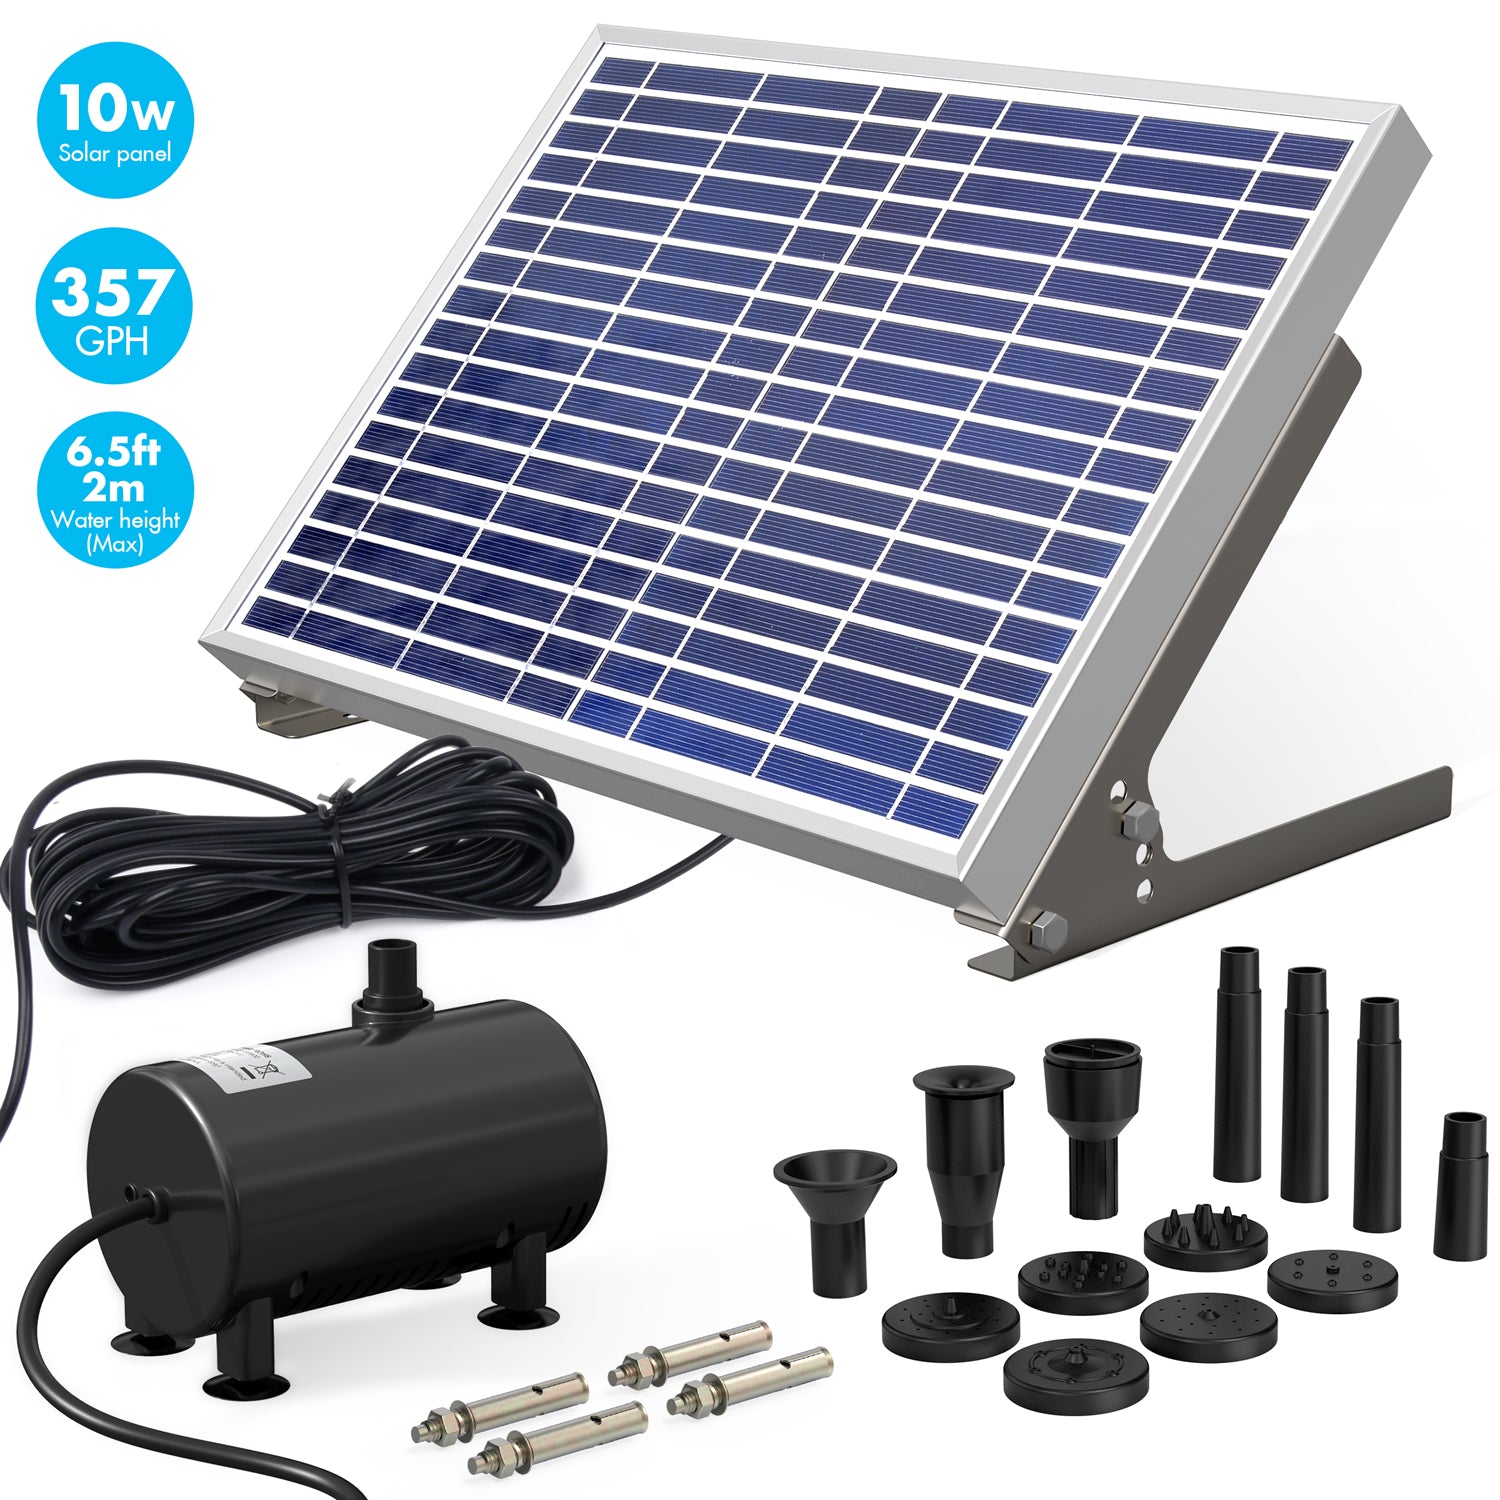 10W Solar Fountain Pump with Solar Panel Outdoor Fountain Pump Kit for Small Pond